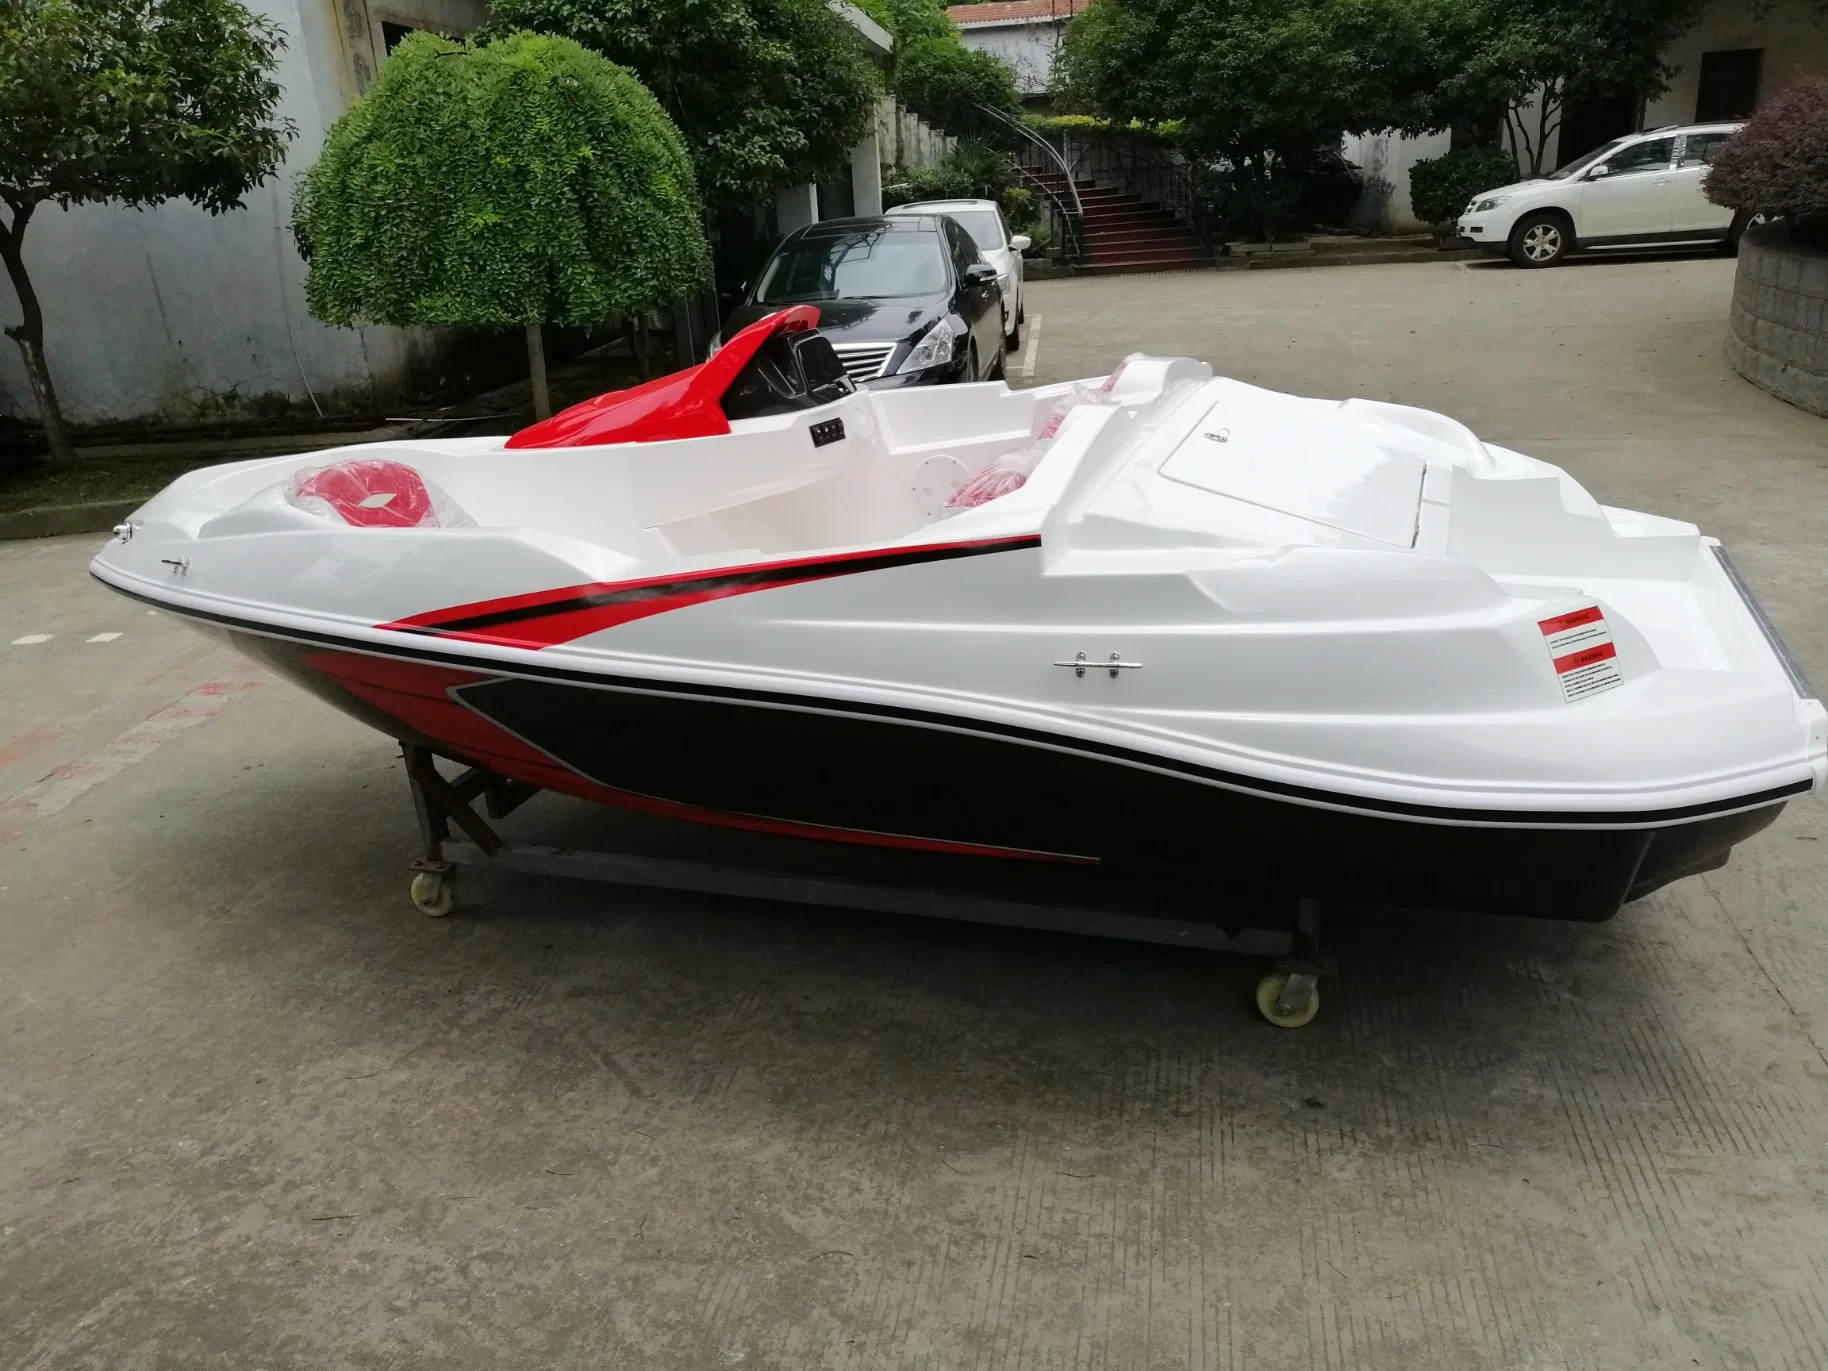 4.4m Speed Sport Luxury Motor Fishing Boat/Yacht with 4 People for Sale From China